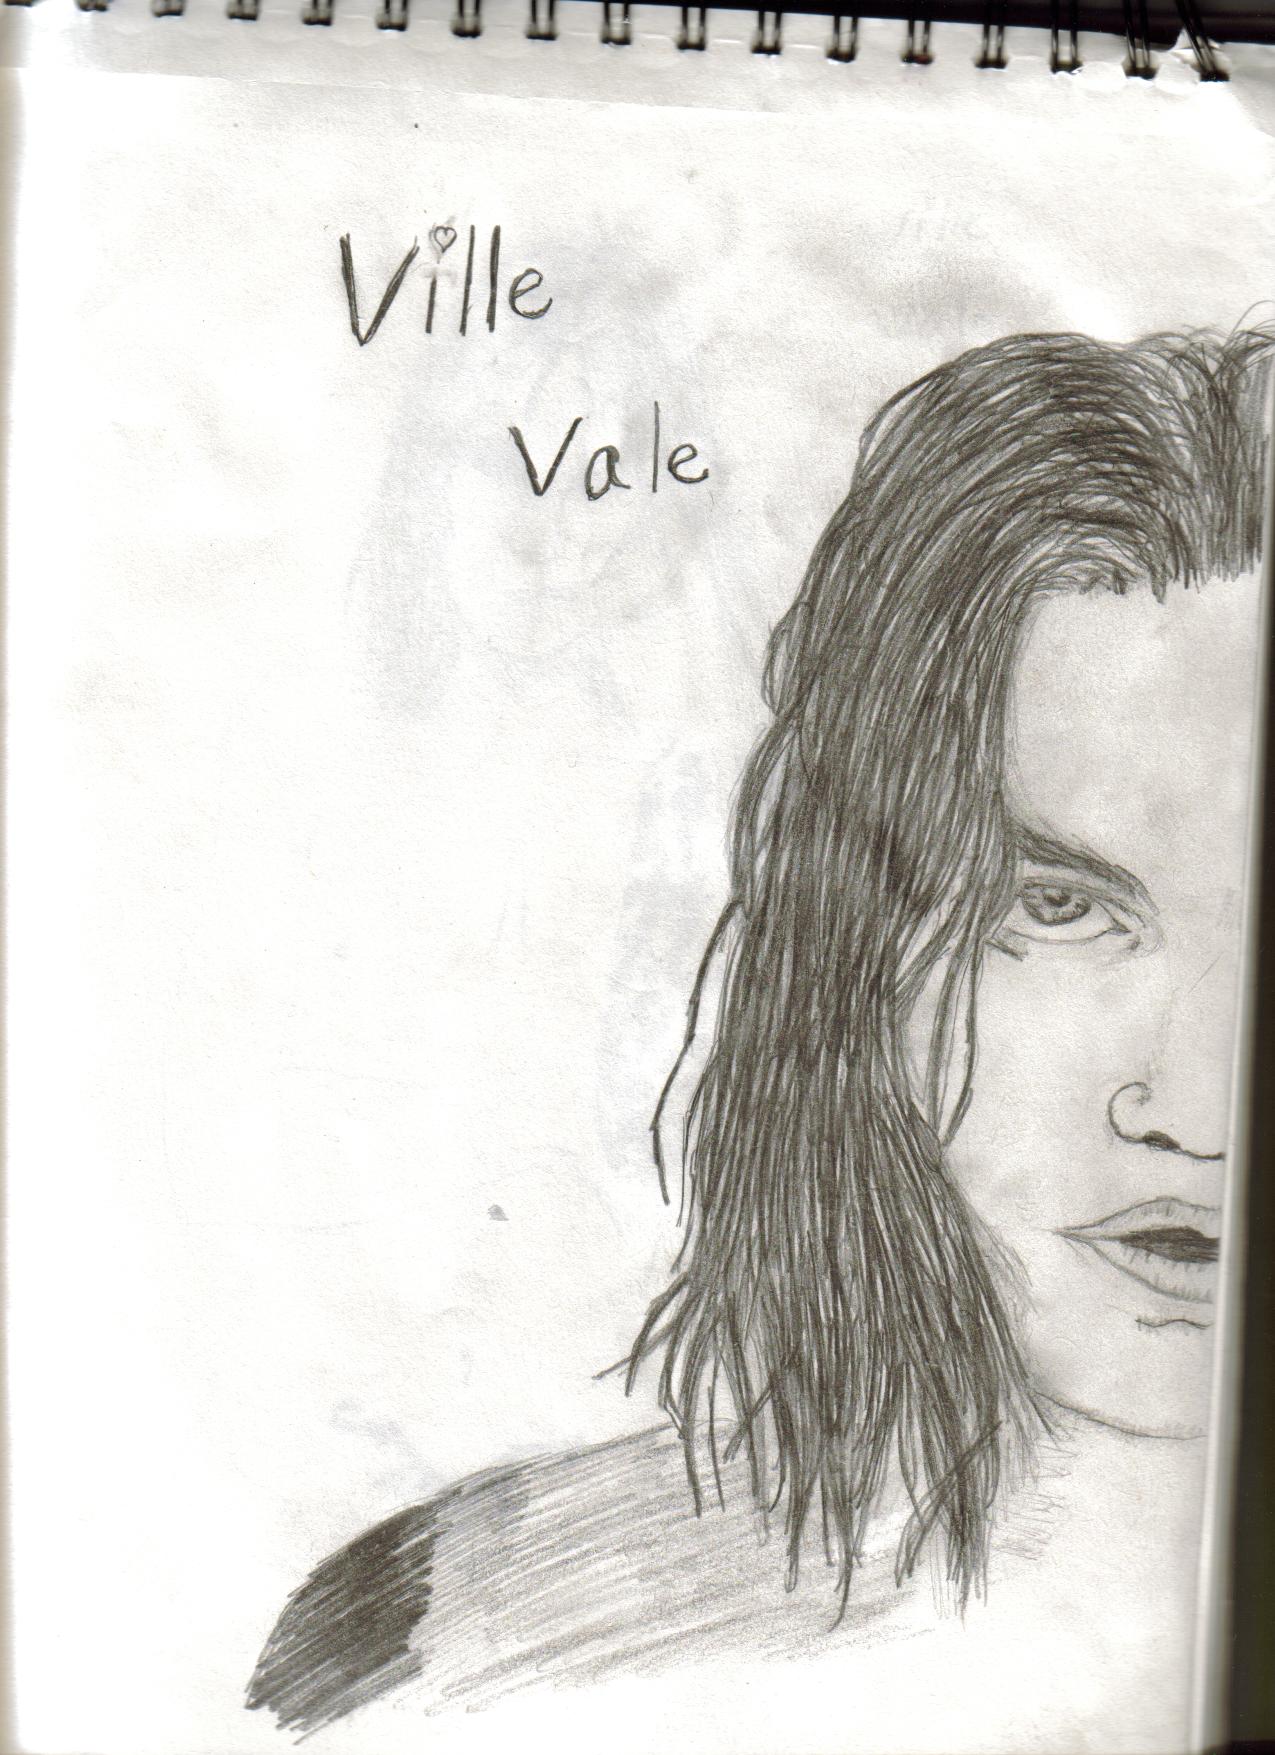 Ville Valo by Mcrluvr